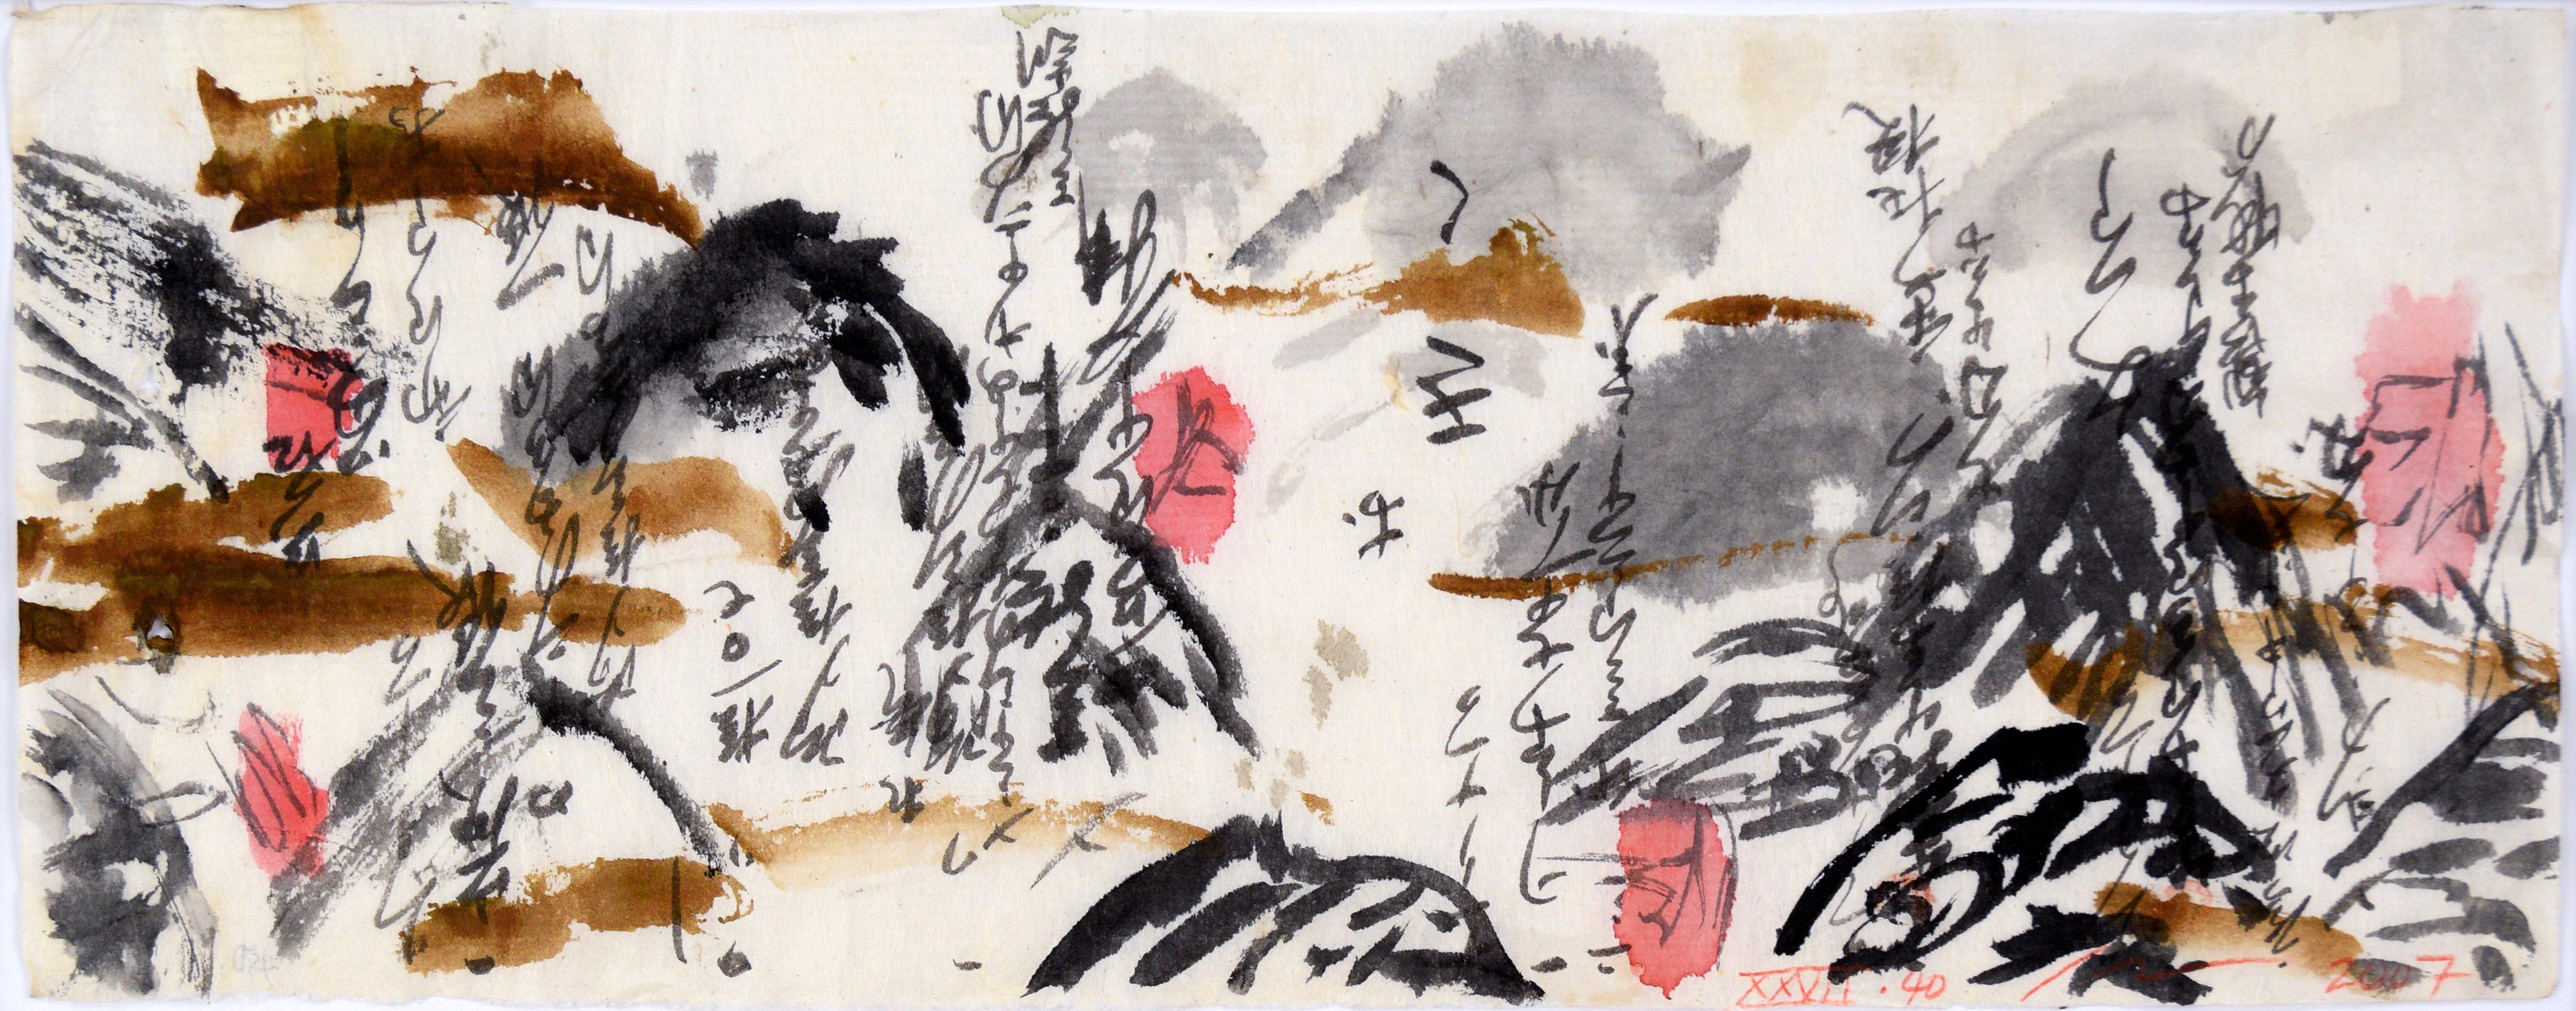 Calligraphy Abstract Panorama I - Japanese Calligraphy on Rice Paper - Painting by Michael Pauker 